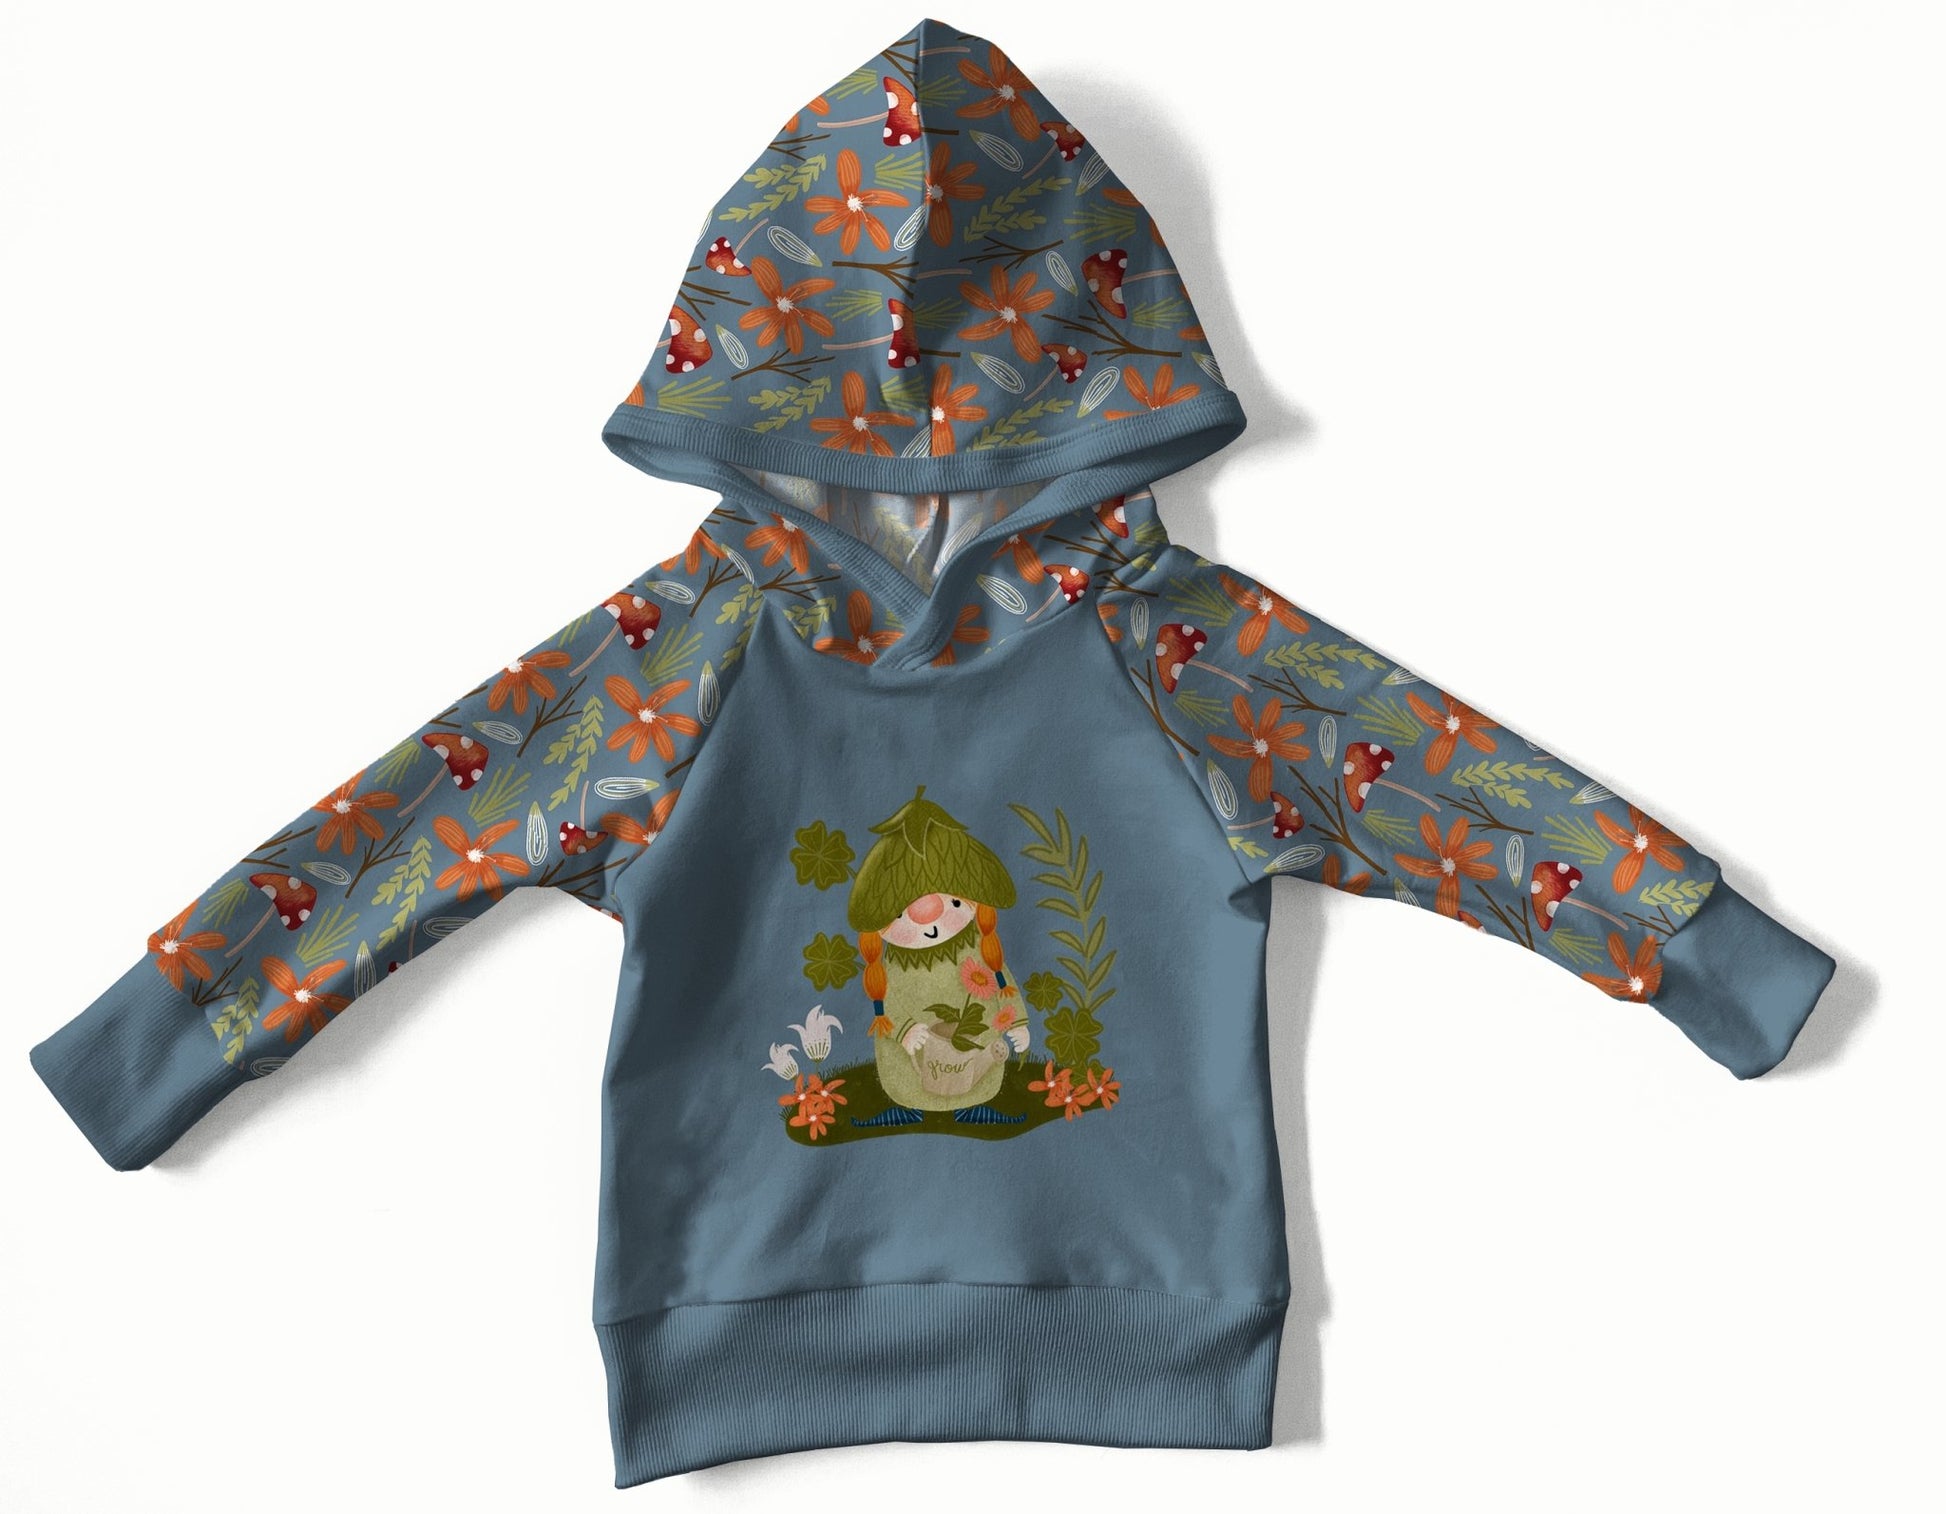 Blue hoodie with a floral and mushroom print. A girl gnome is on the front.  